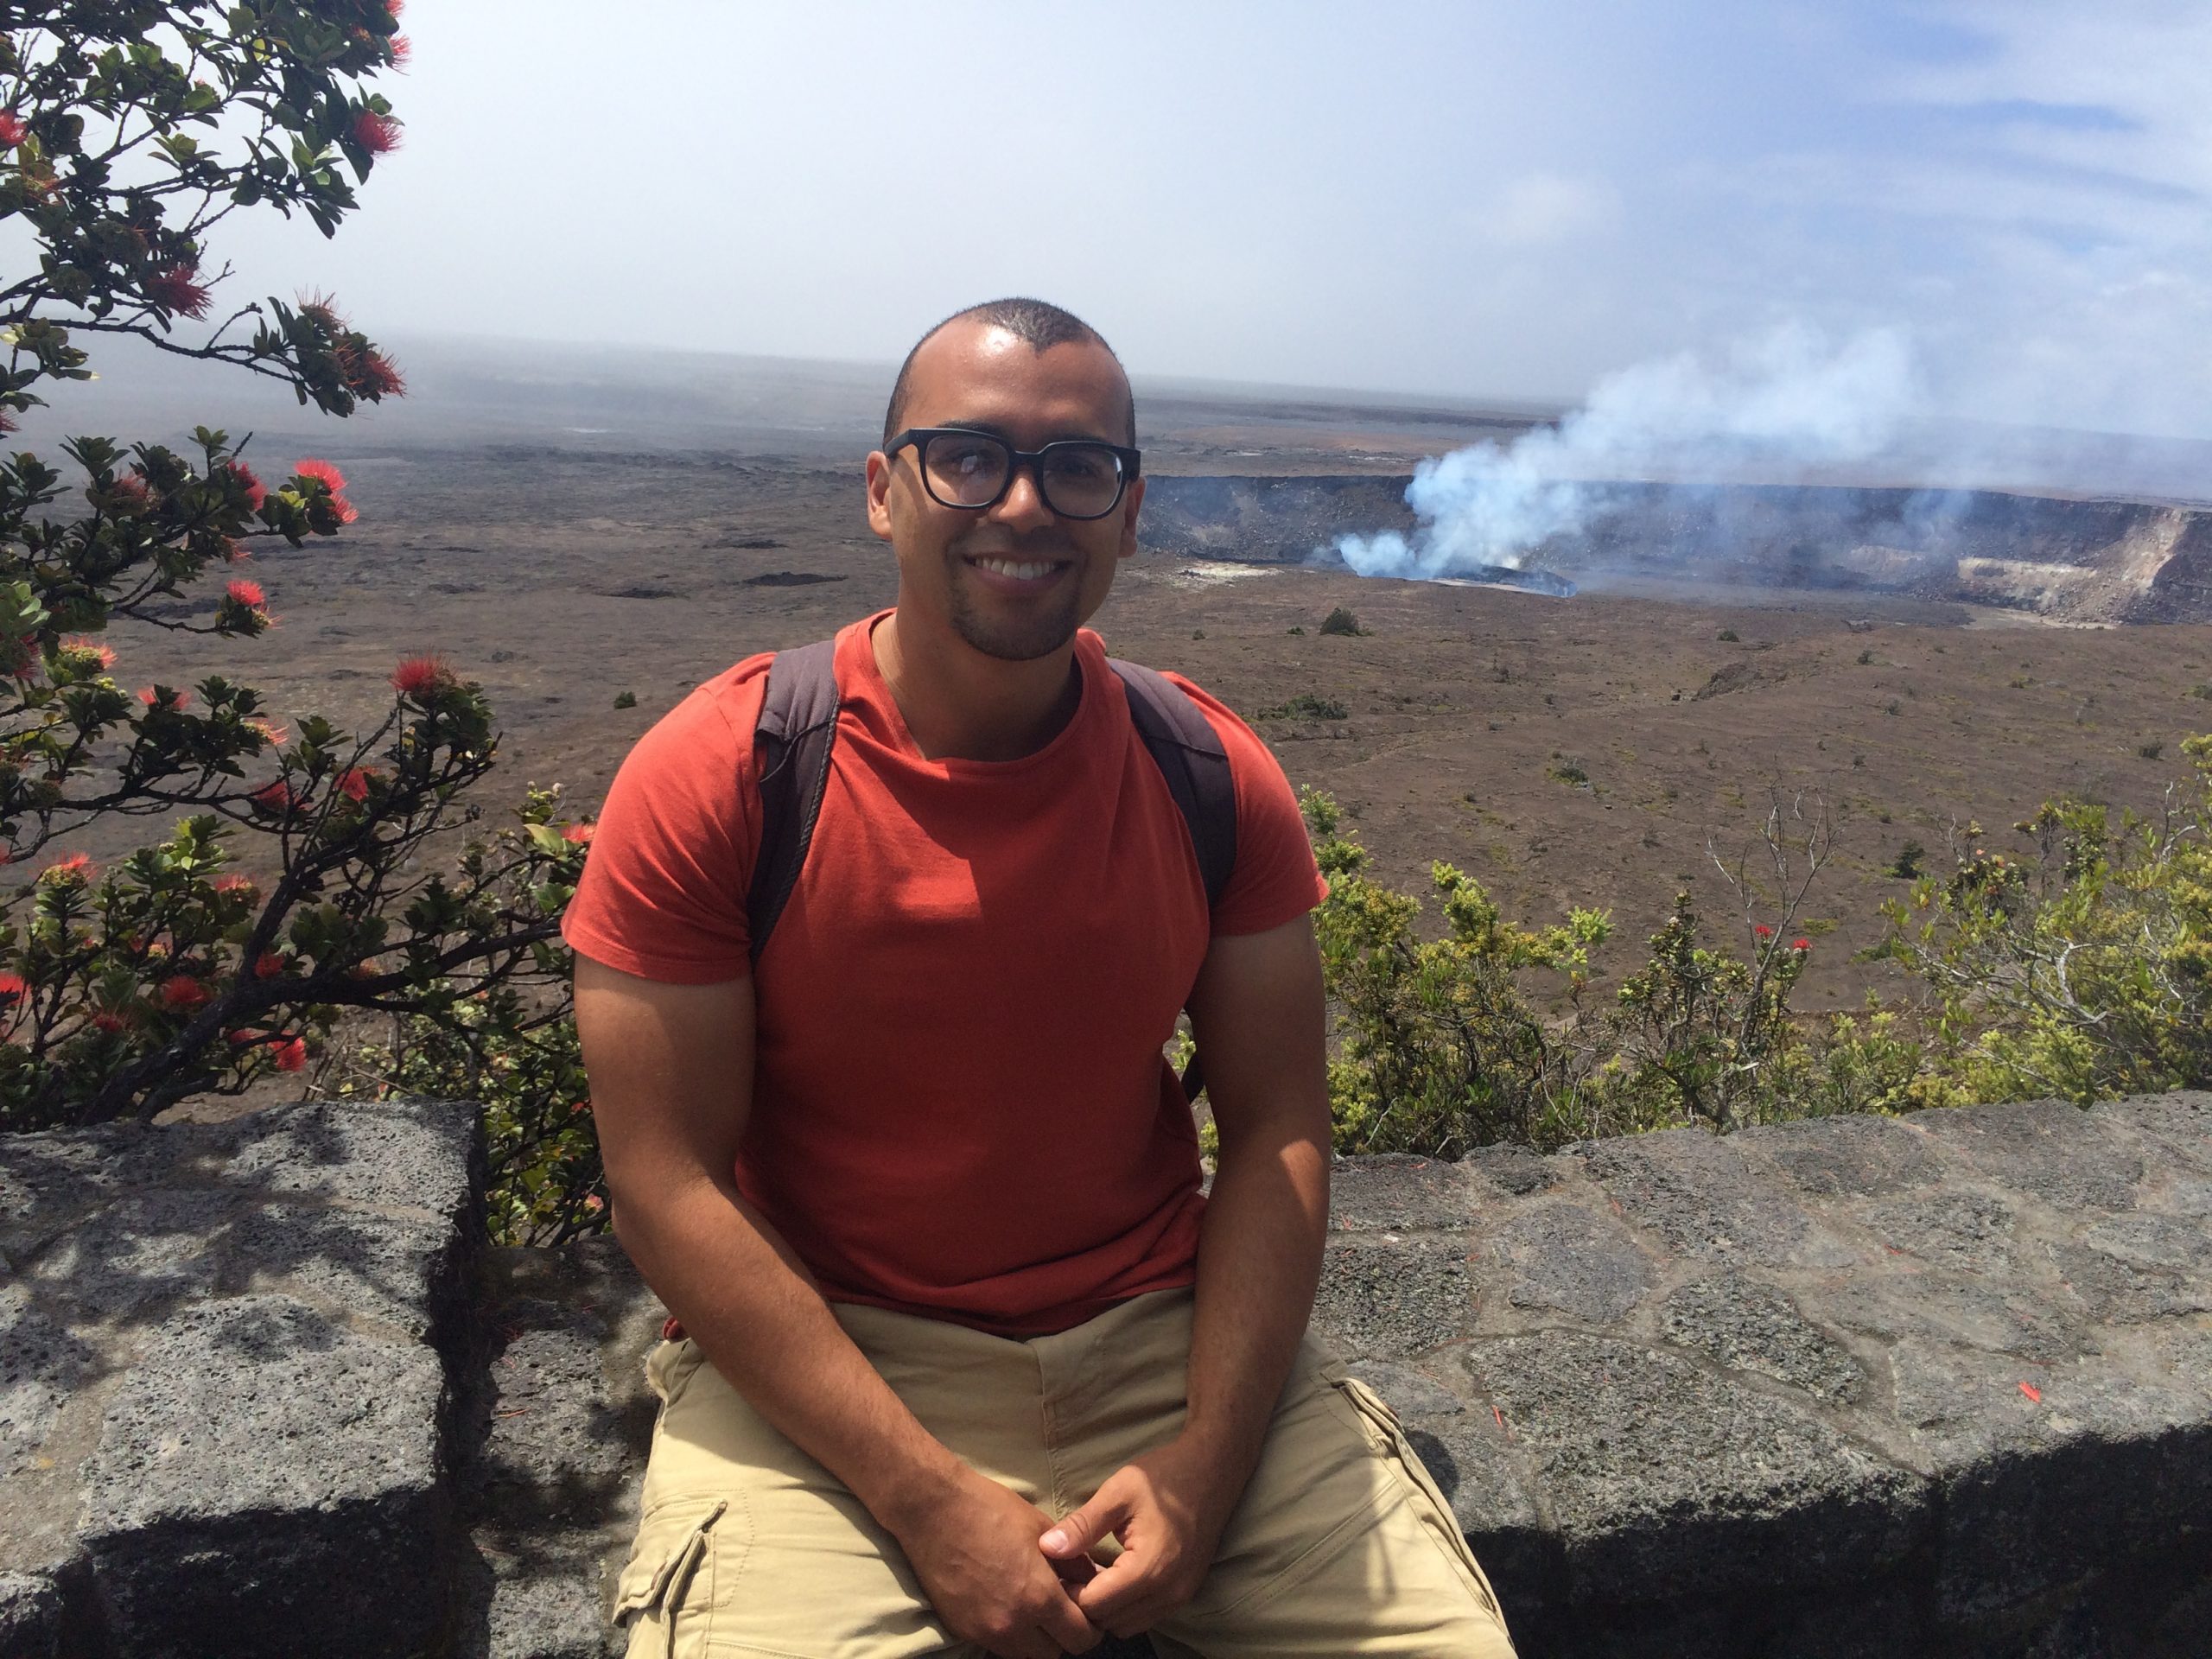 Sitting in front of Kilauea crater volcano big island